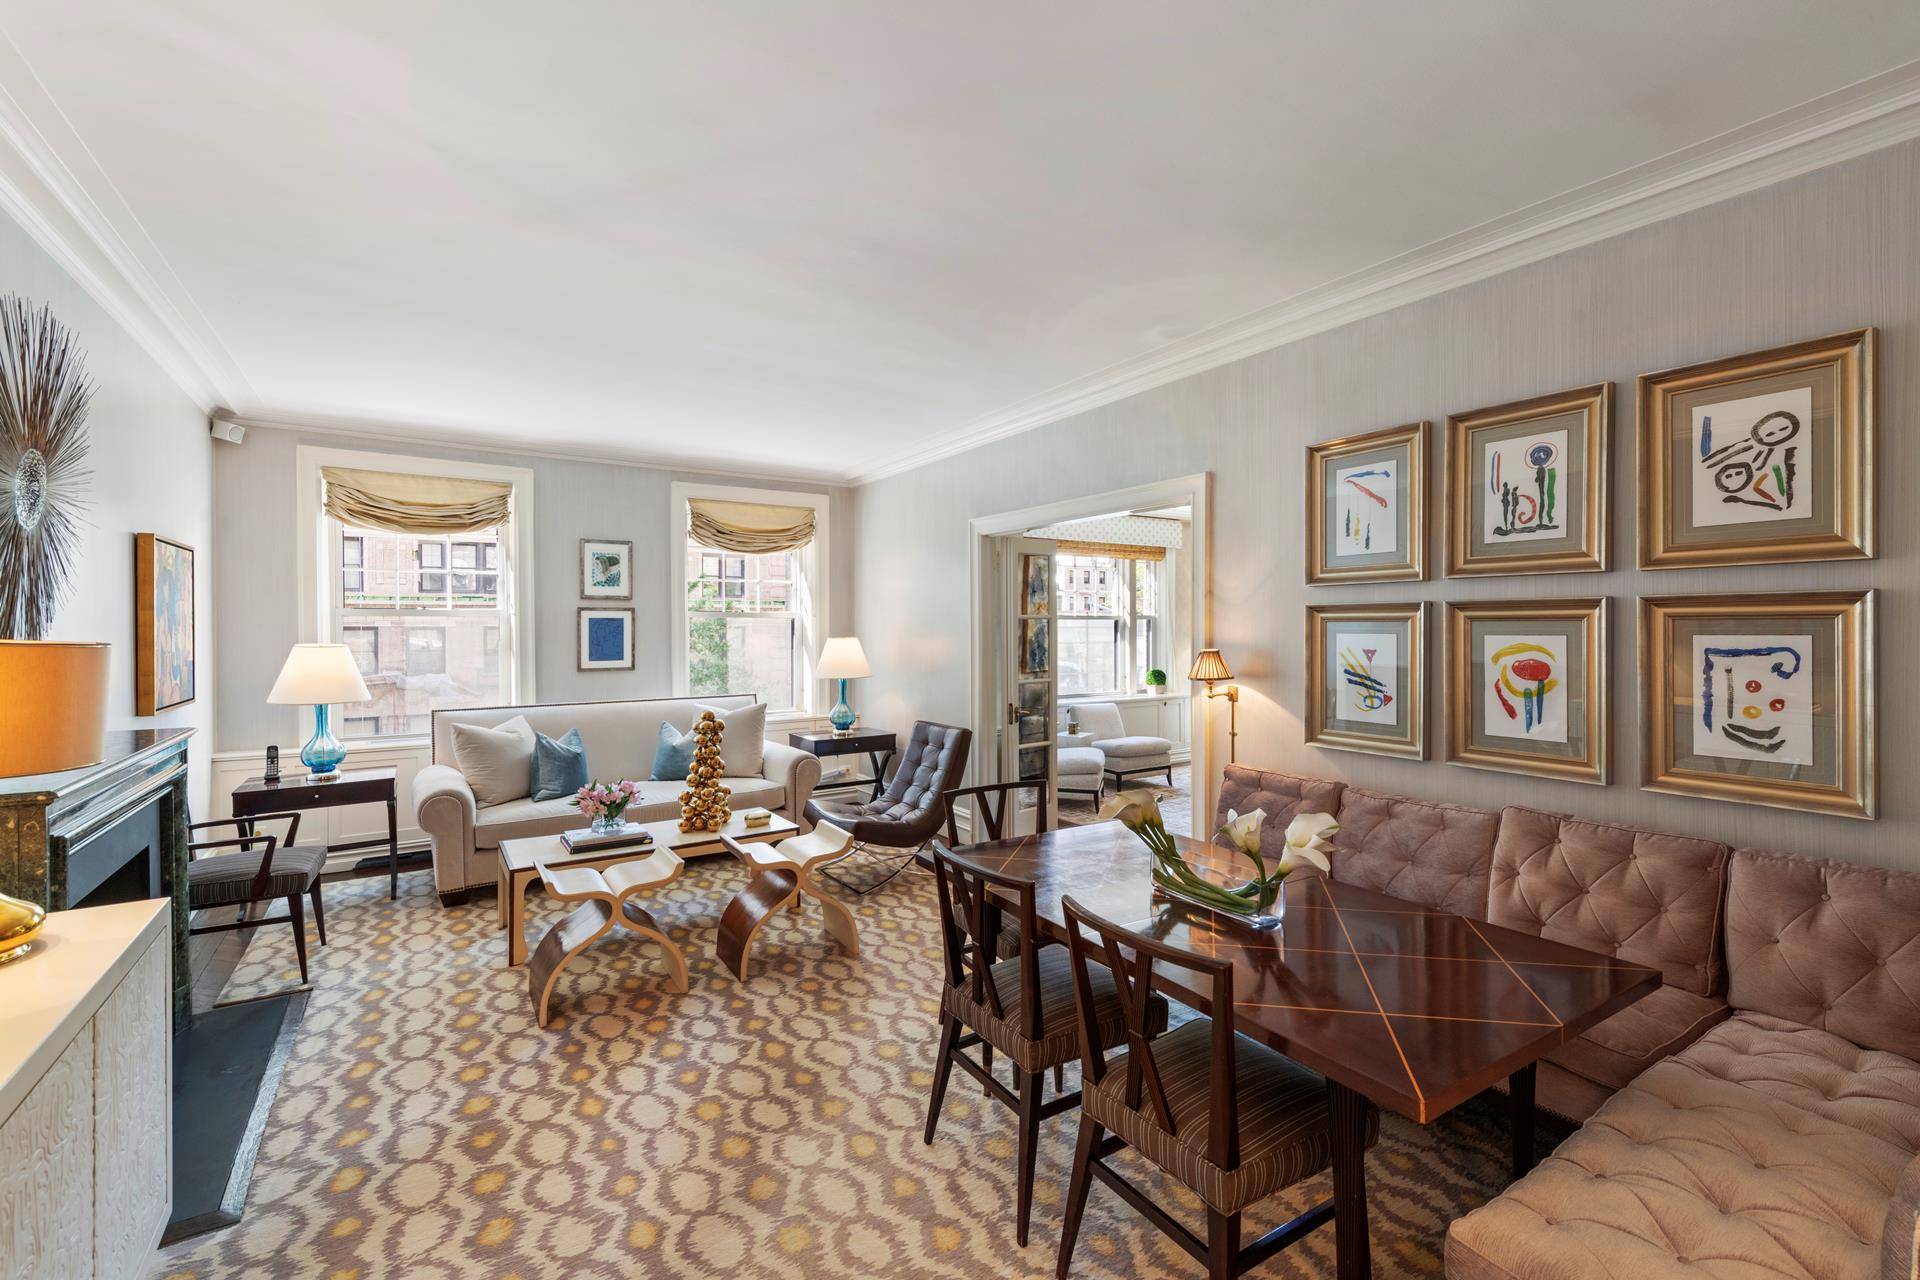 Welcome home to this stunning classic 8 conversion in a perfect UES neighborhood.